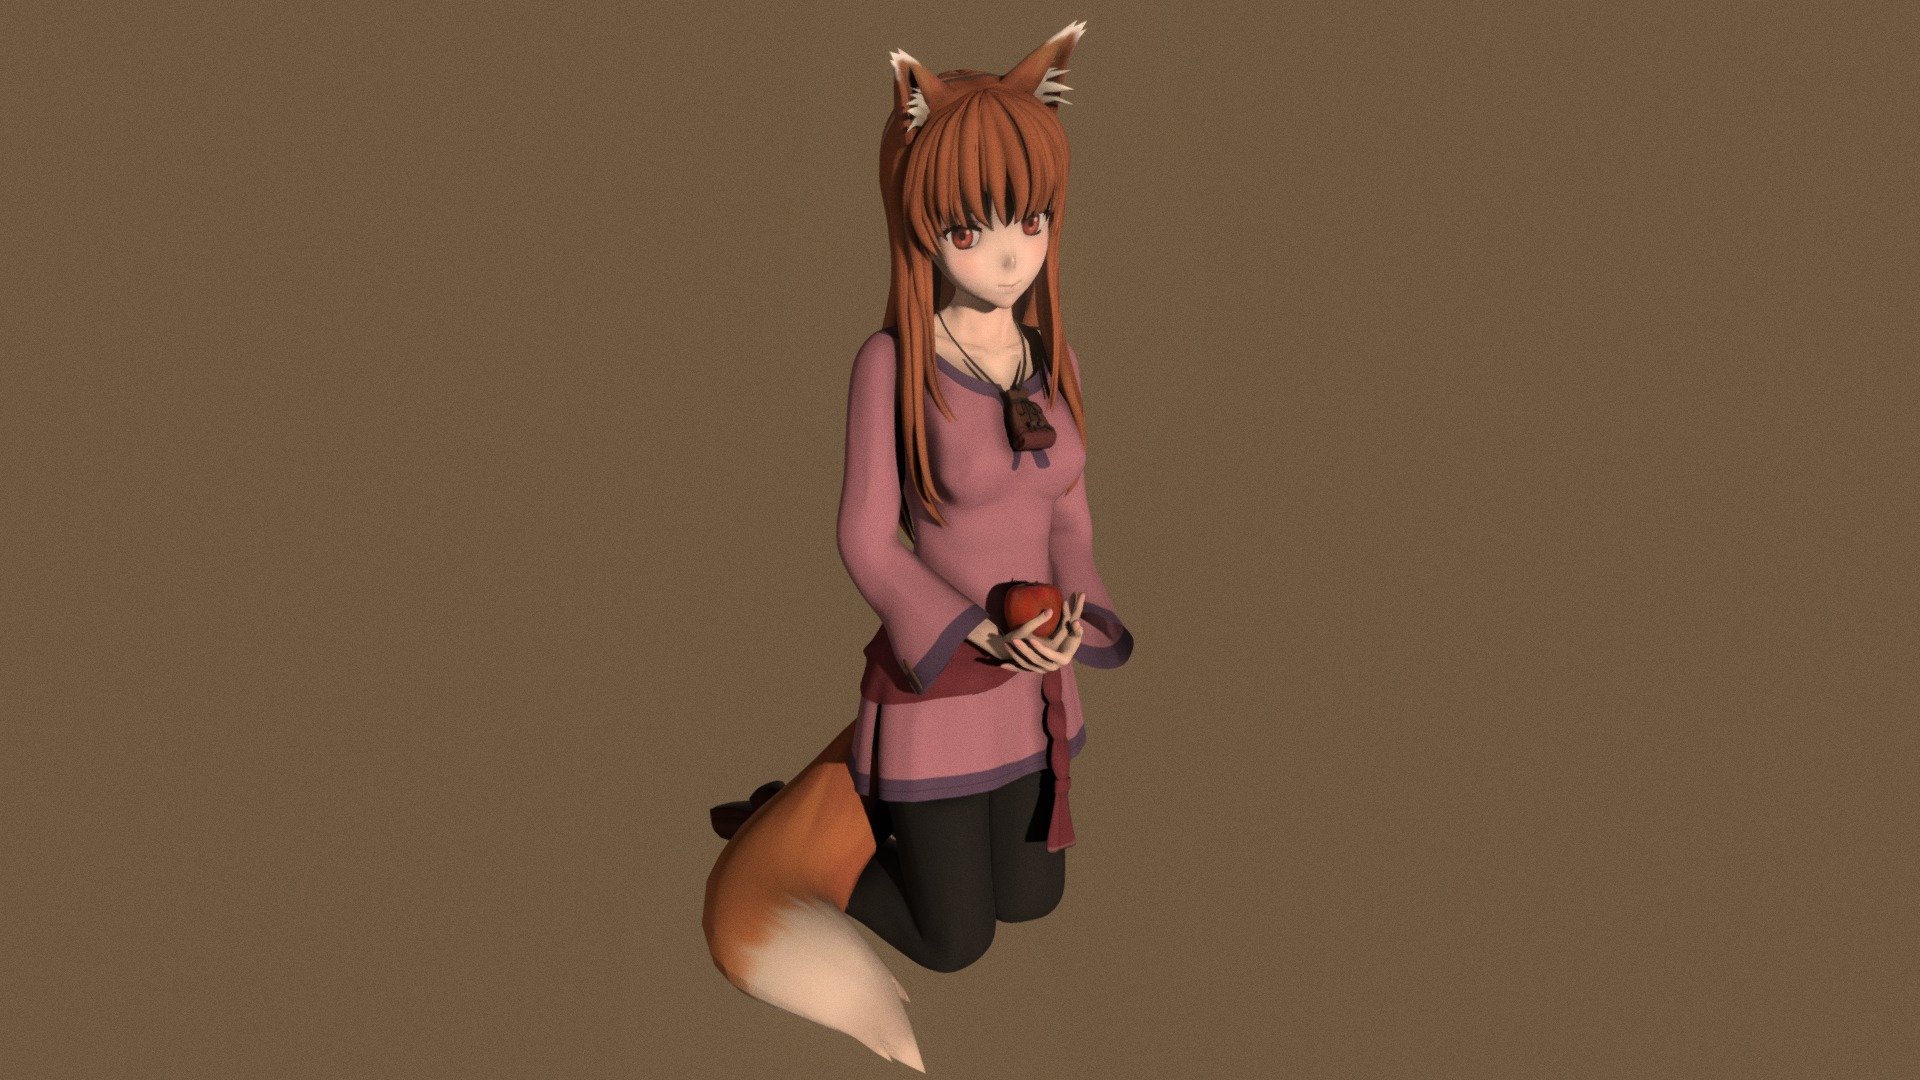 Posed model of anime girl Horo (Spice and Wolf).

This product include .FBX (ver. 7200) and .MAX (ver. 2010) files.

Rigged version: https://sketchfab.com/3d-models/t-pose-rigged-model-of-horo-78da7c8f3e704fe7a8800f416680980c

I support convert this 3D model to various file formats: 3DS; AI; ASE; DAE; DWF; DWG; DXF; FLT; HTR; IGS; M3G; MQO; OBJ; SAT; STL; W3D; WRL; X.

You can buy all of my models in one pack to save cost: https://sketchfab.com/3d-models/all-of-my-anime-girls-c5a56156994e4193b9e8fa21a3b8360b

And I can make commission models.

If you have any questions, please leave a comment or contact me via my email 3d.eden.project@gmail.com 3d model